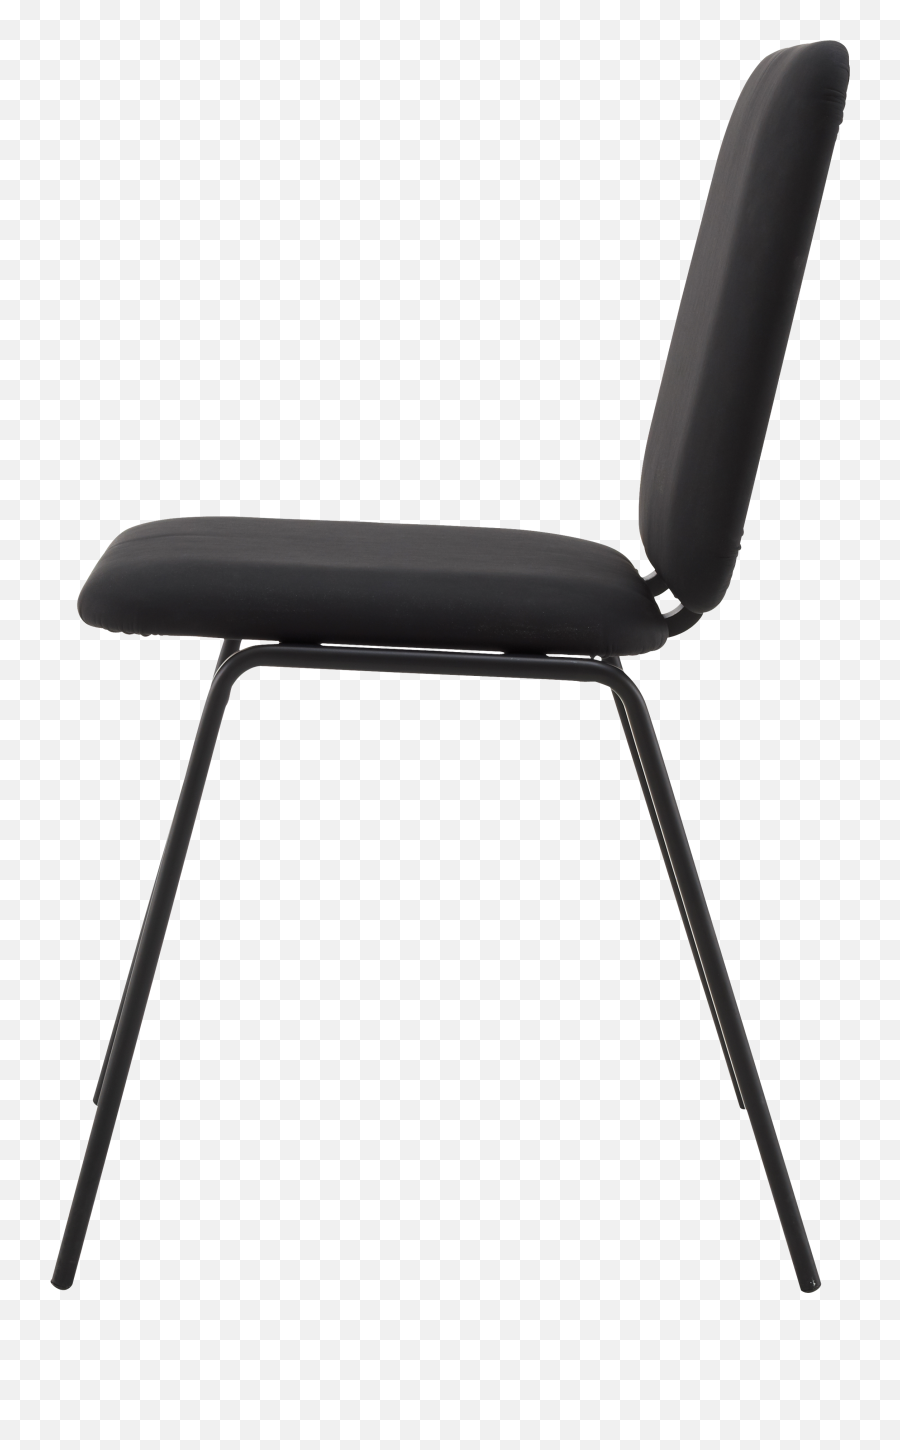 Chair Png Image - Transparent Side Chair Png Emoji,Chair Png